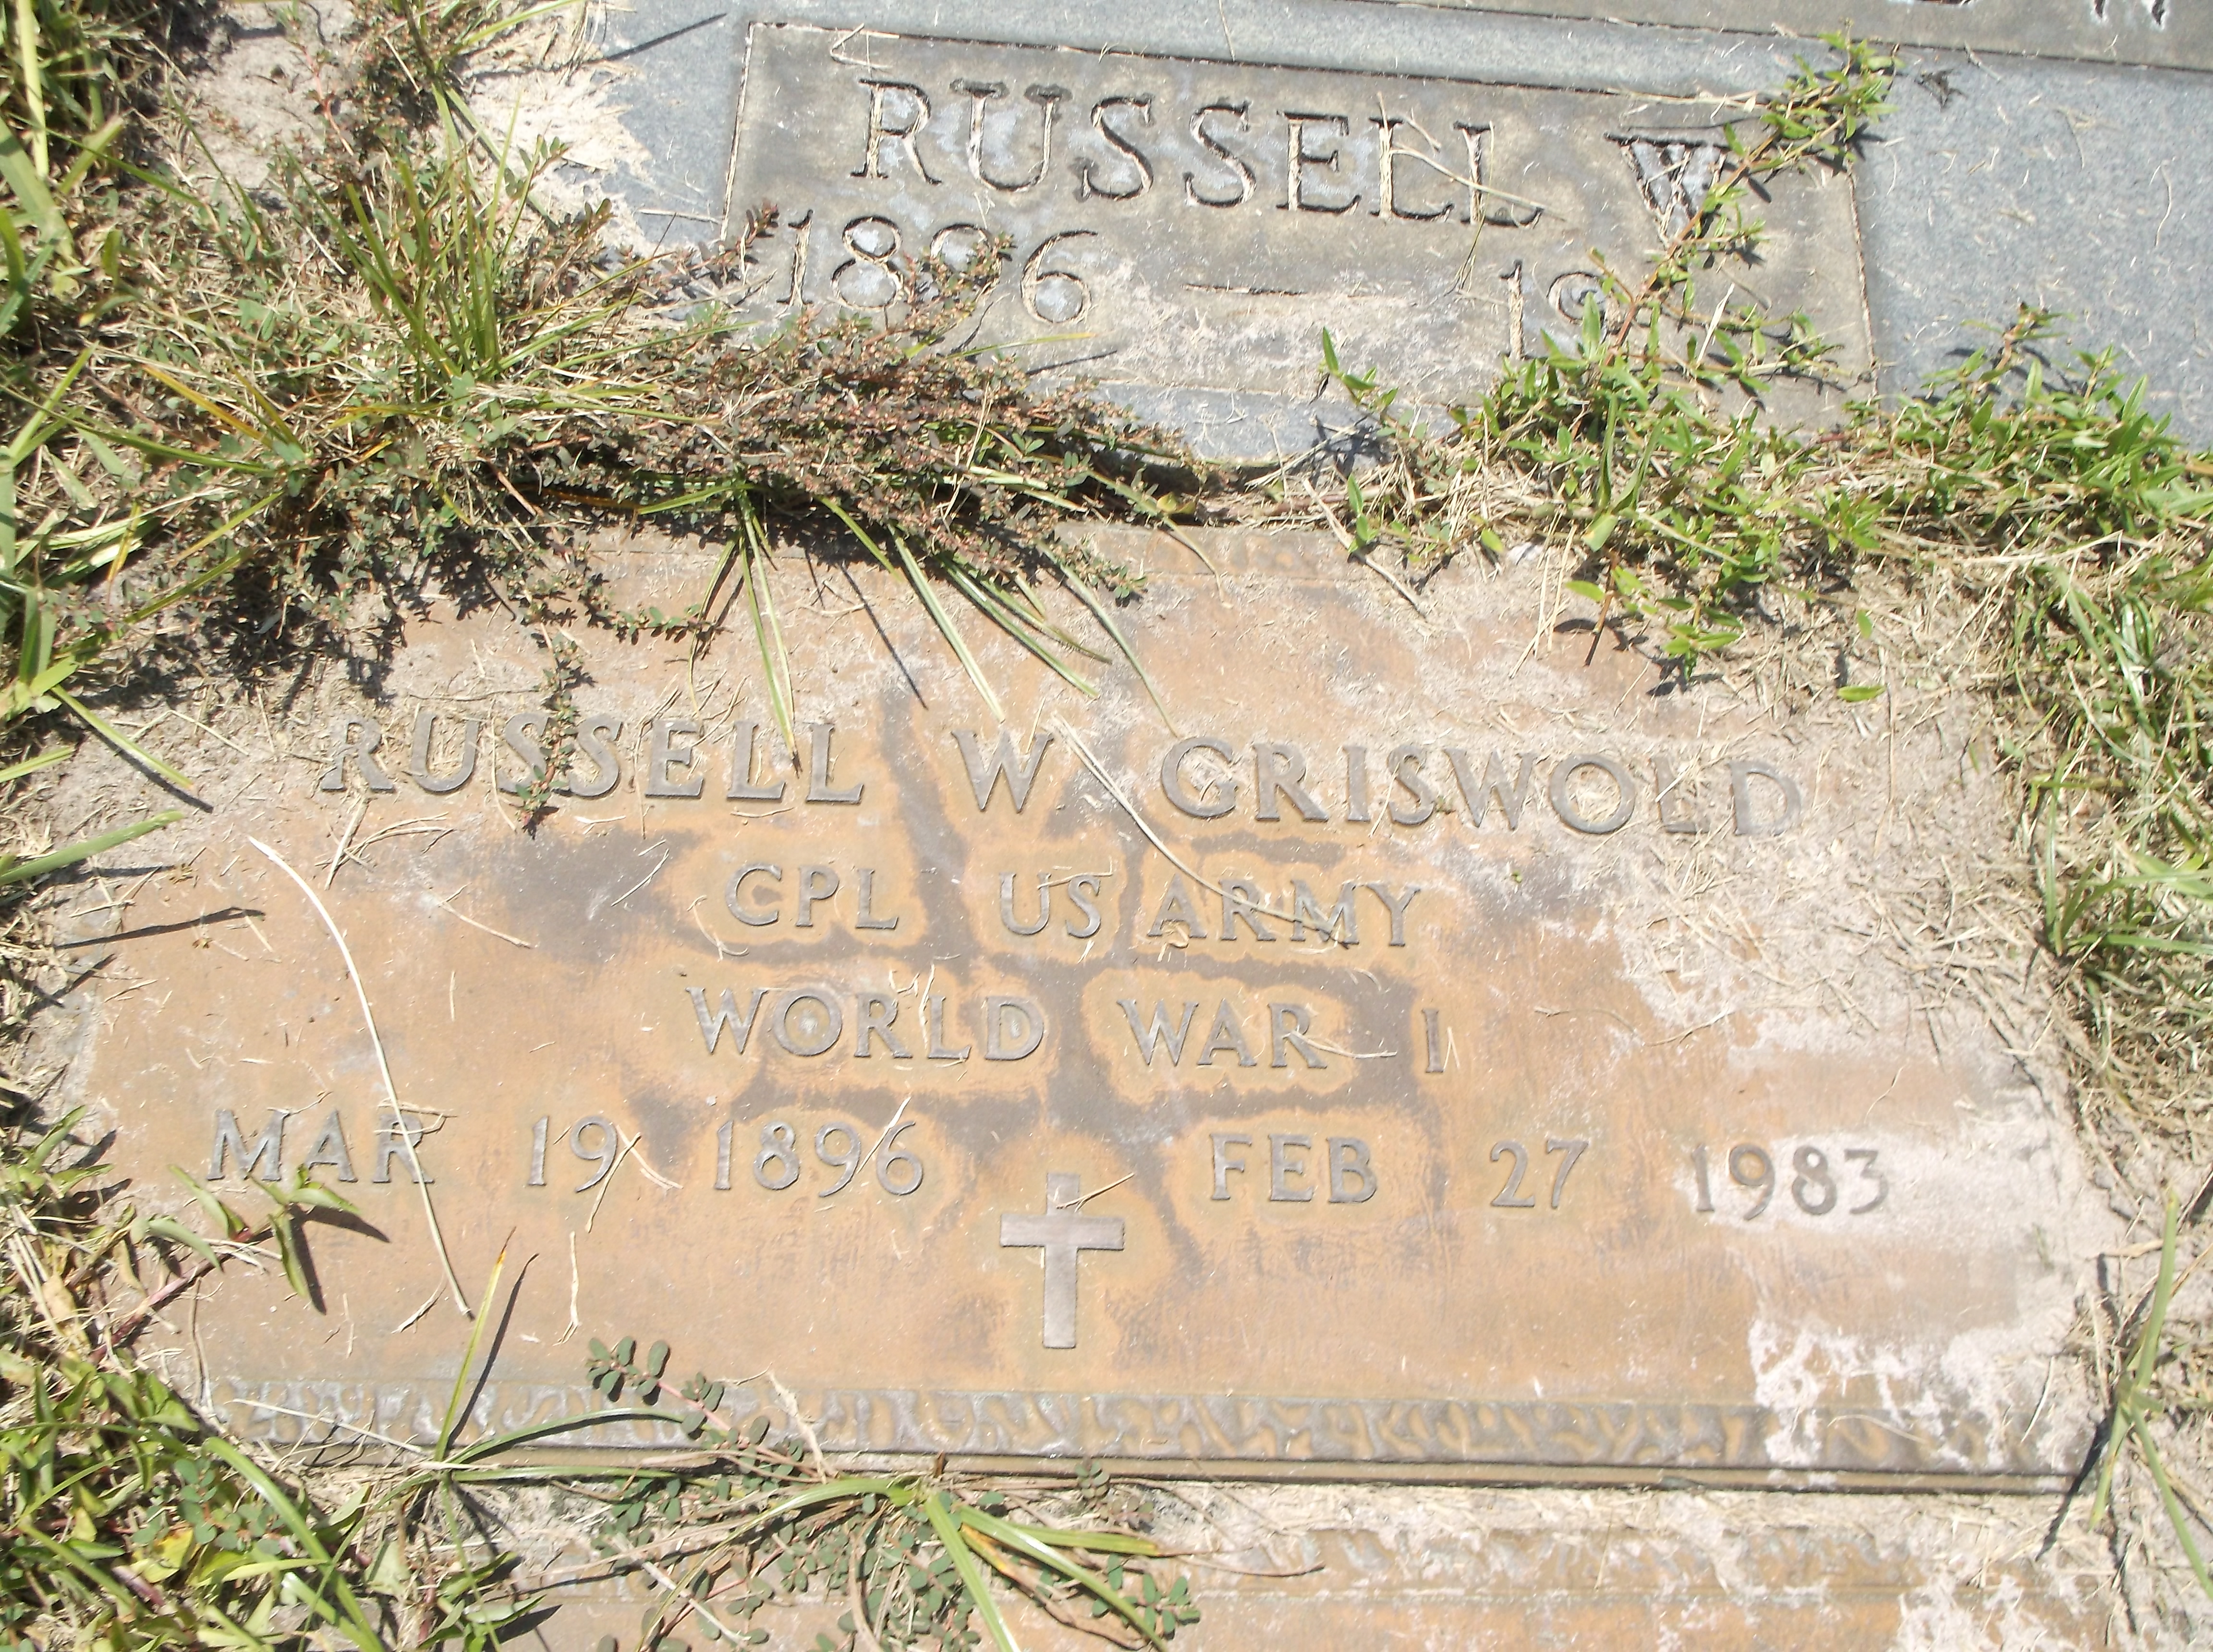 Russell W Griswold